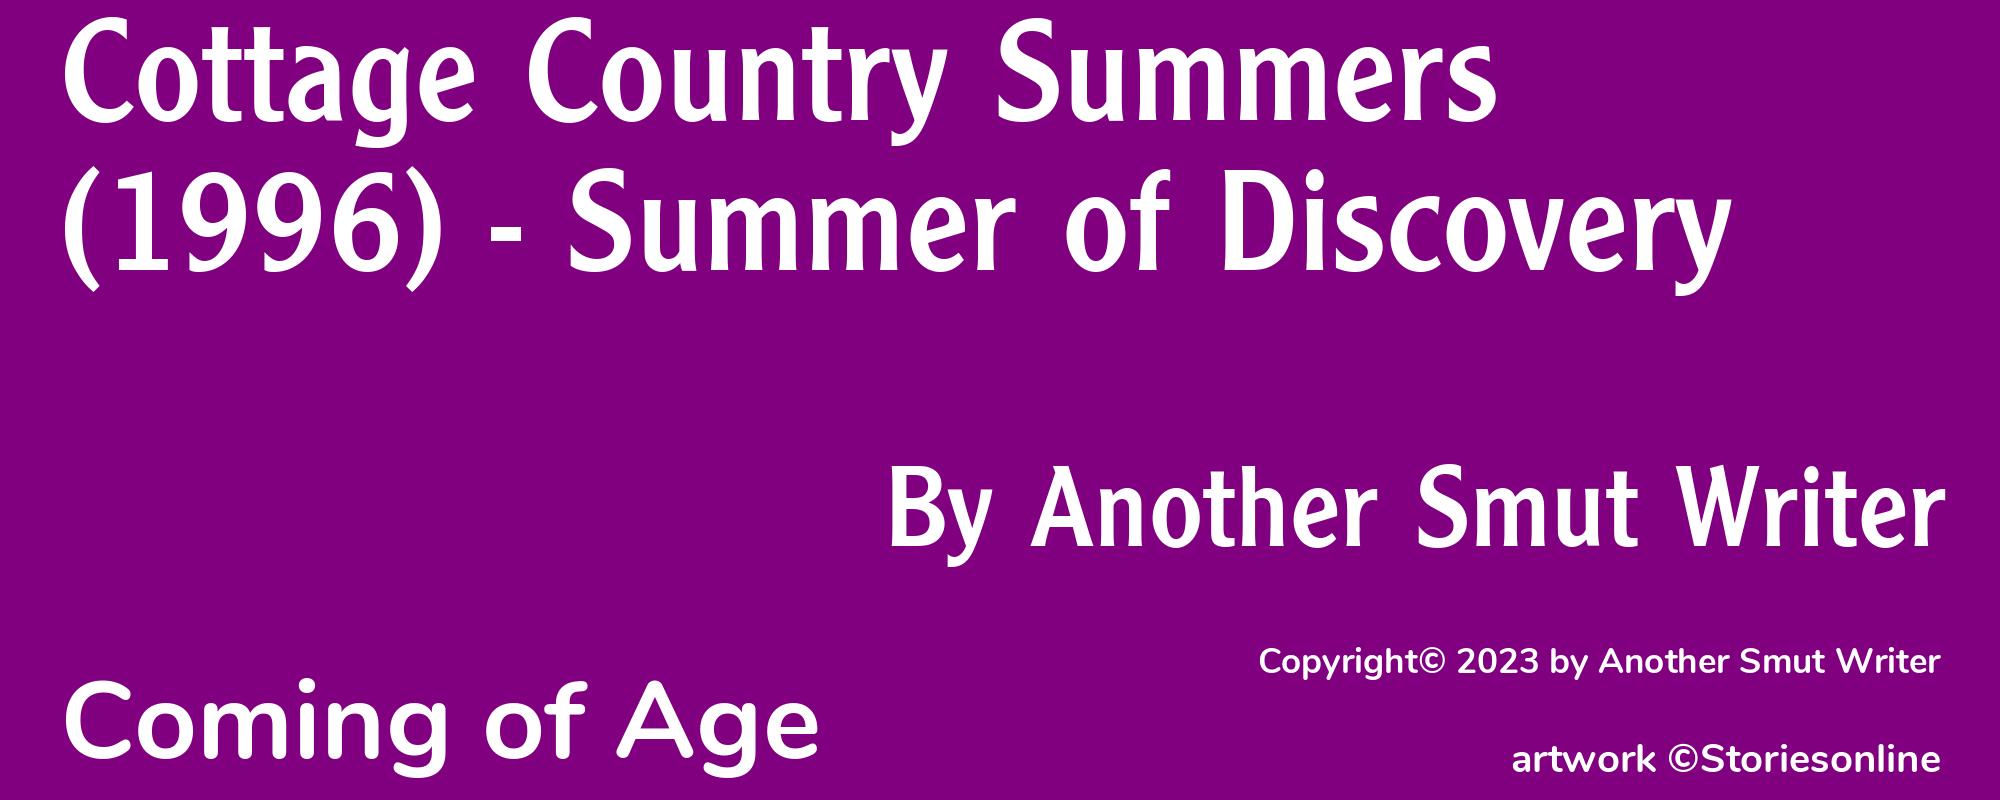 Cottage Country Summers (1996) - Summer of Discovery - Cover